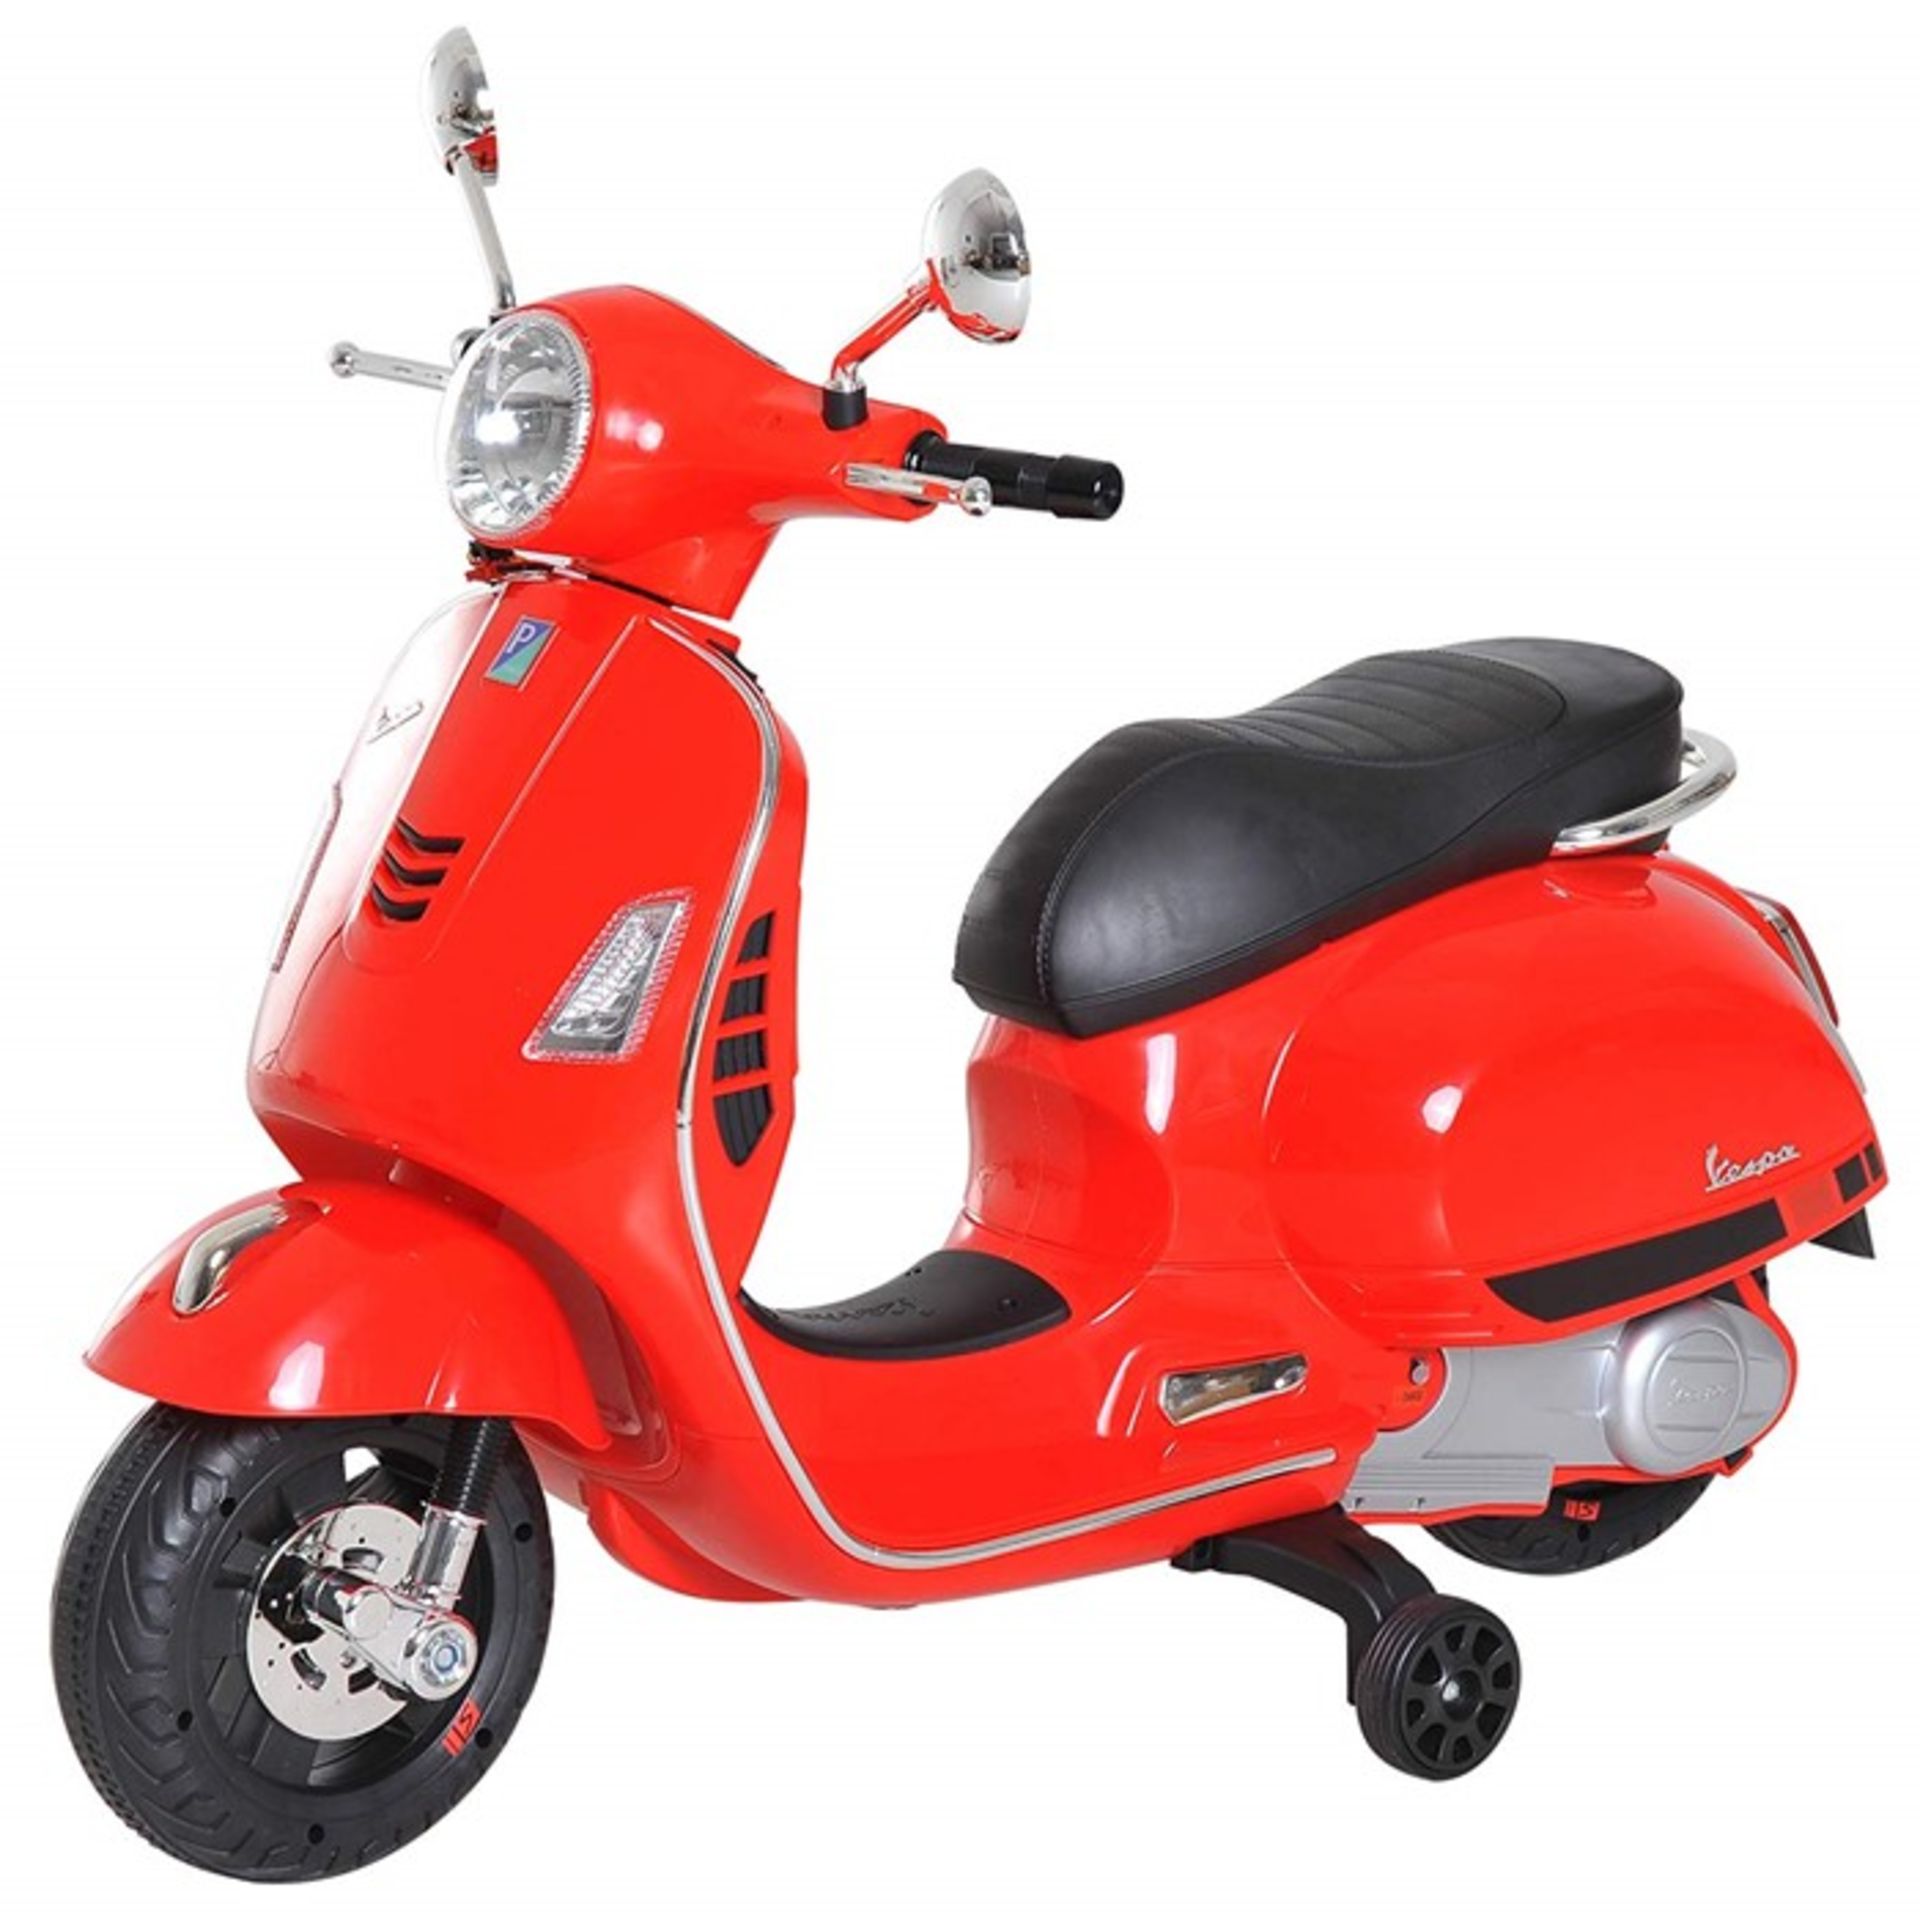 1 BOXED AS NEW CHILDRENS AGE 3+ VESPA RIDE ON SCOOTER IN RED RRP £81.99